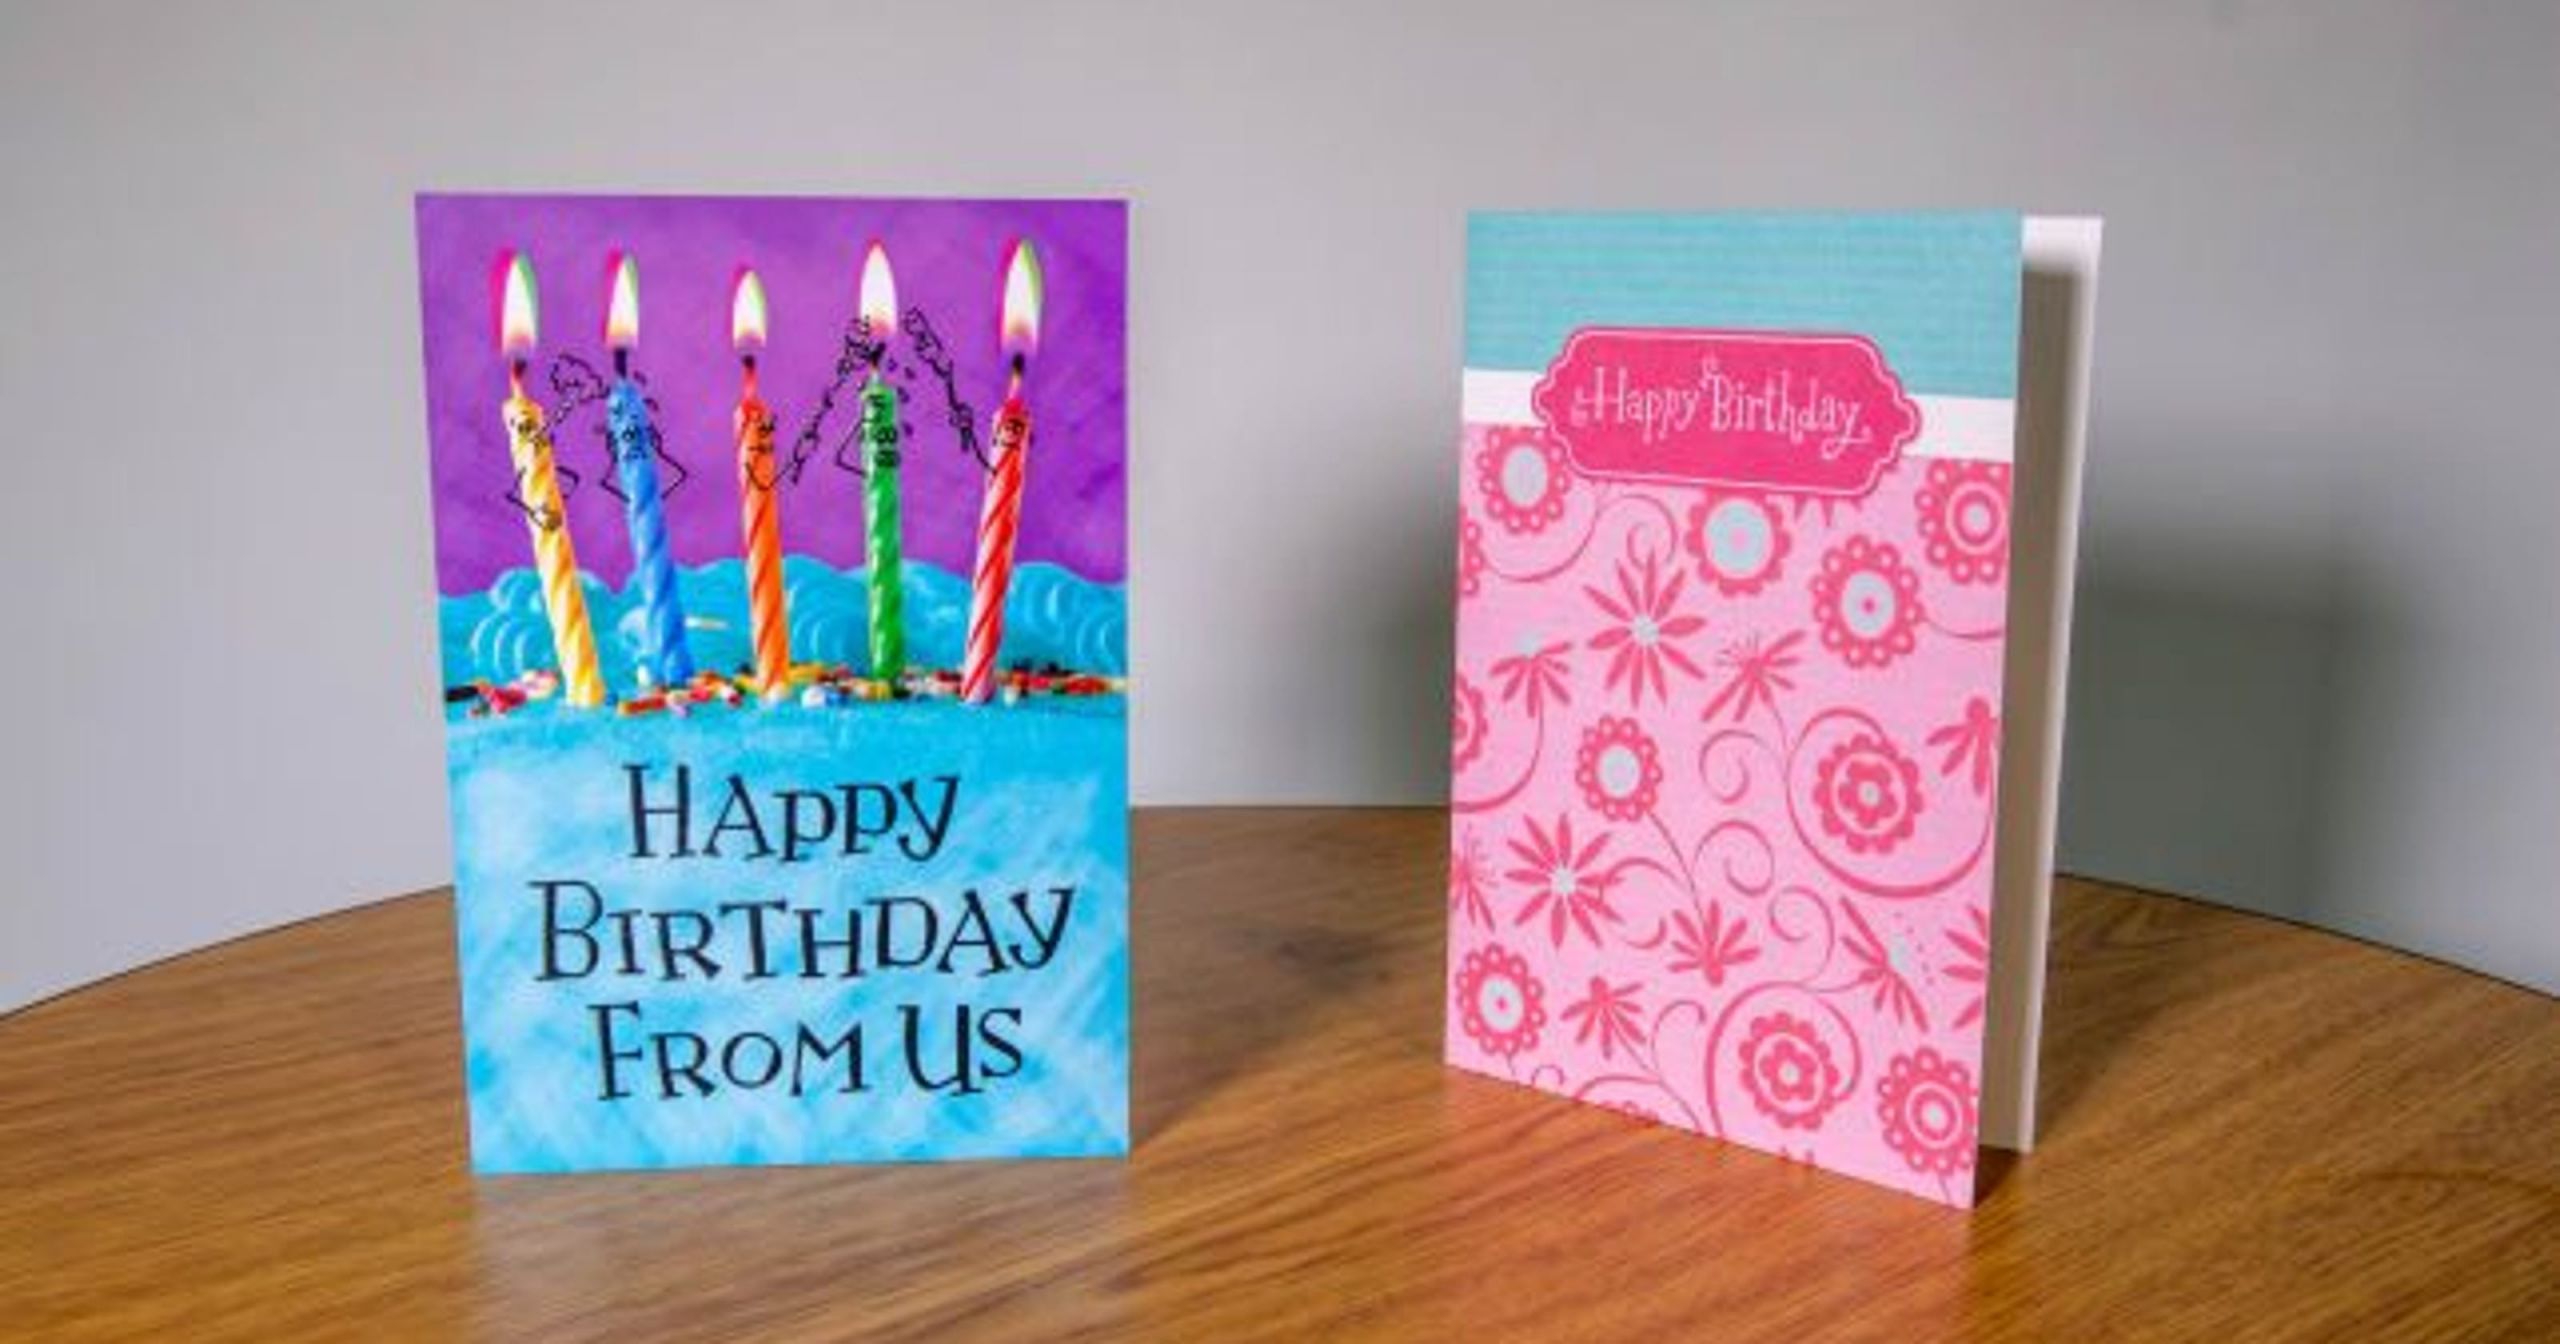 Cvs Birthday Cards
 Walmart CVS may cut greeting card space as cards fall out